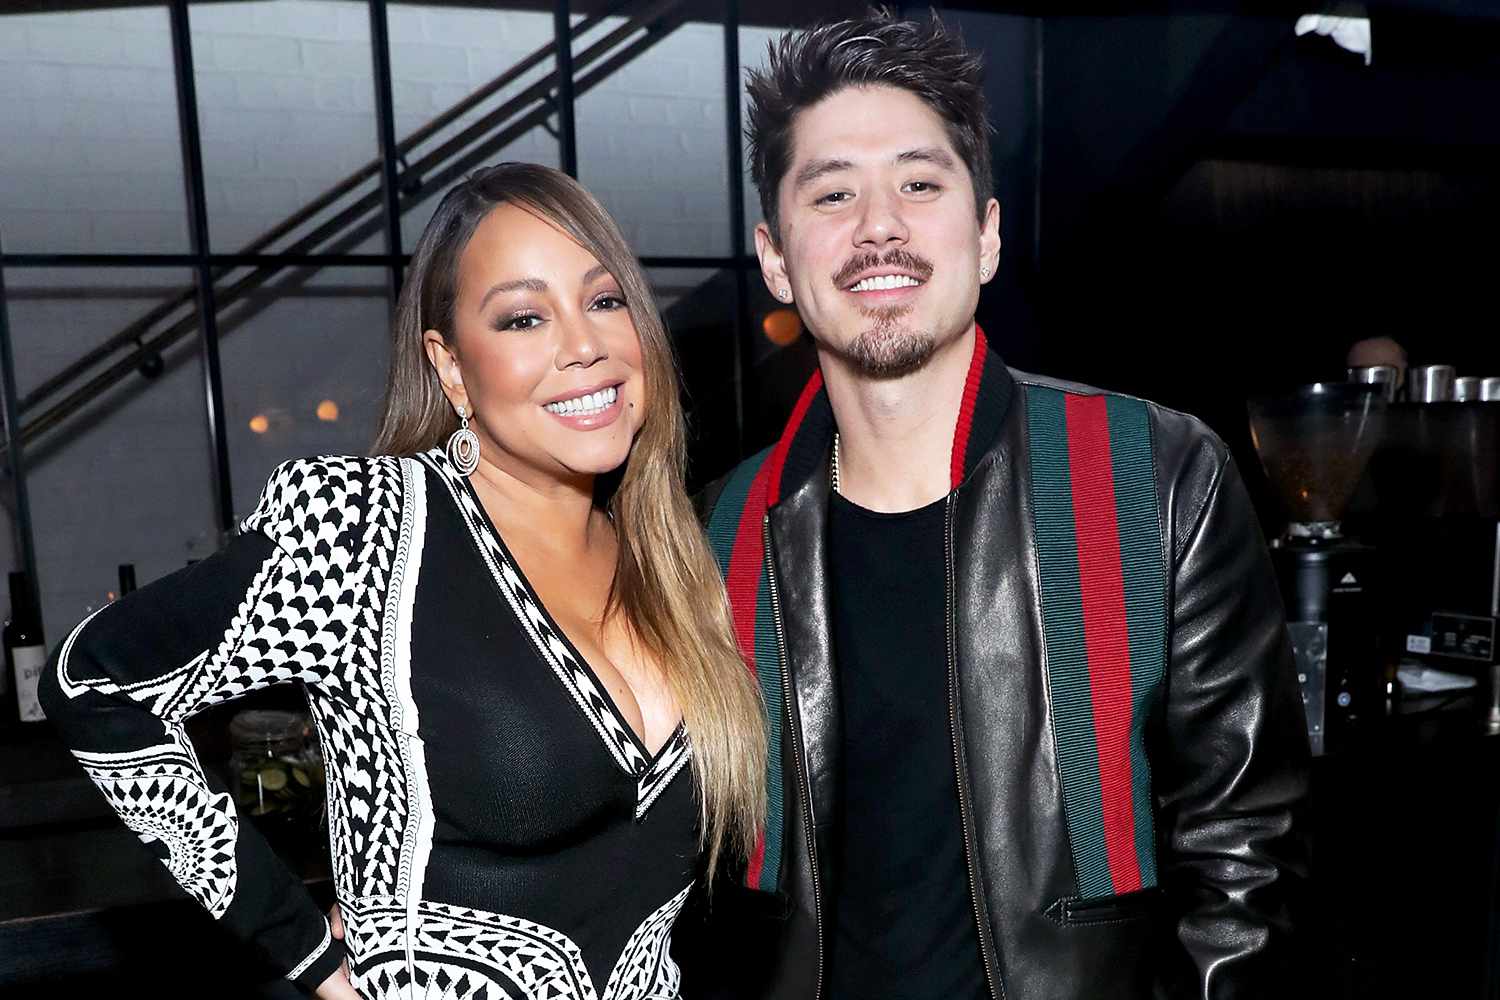 Mariah Carey and Bryan Tanaka attend the Netflix Premiere for Tyler Perry's "A Fall From Grace" at Metrograph on January 13, 2020 in New York City.